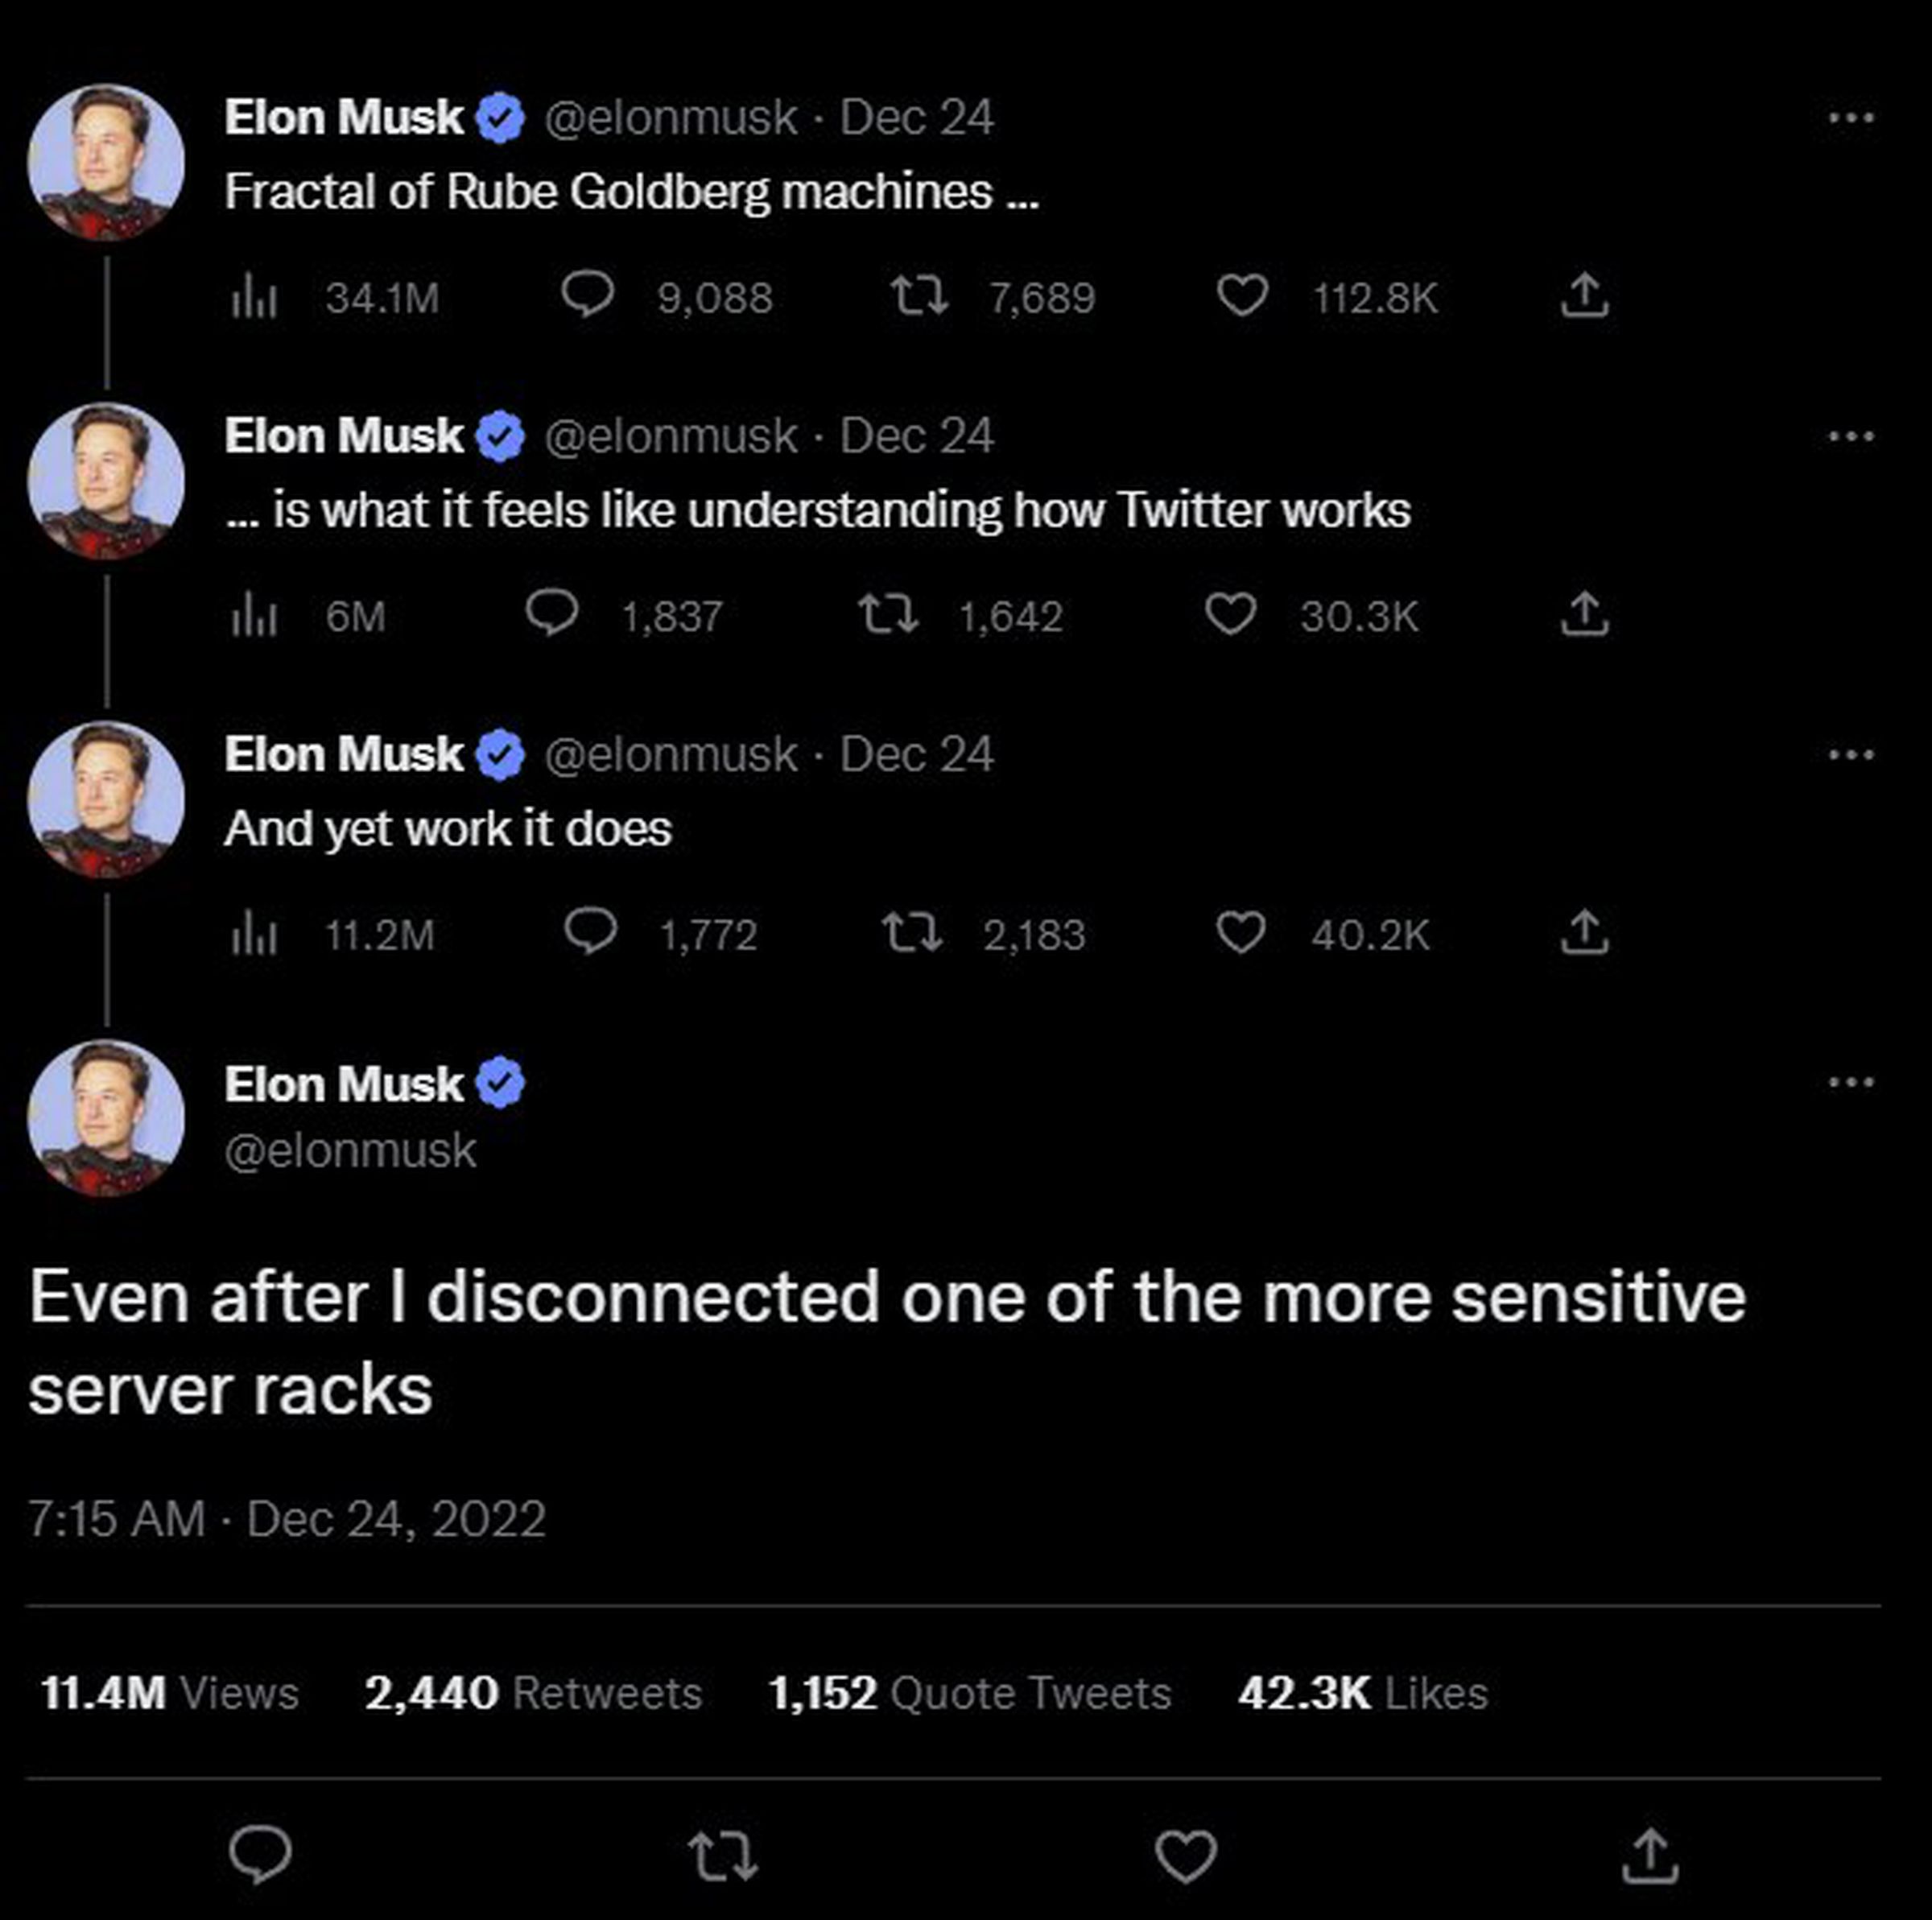 Elon Musk, in a series of tweets posted on December 24th: “Fractal of Rube Goldberg machines …, … is what it feels like understanding how Twitter works, And yet work it does, Even after I disconnected one of the more sensitive server racks”